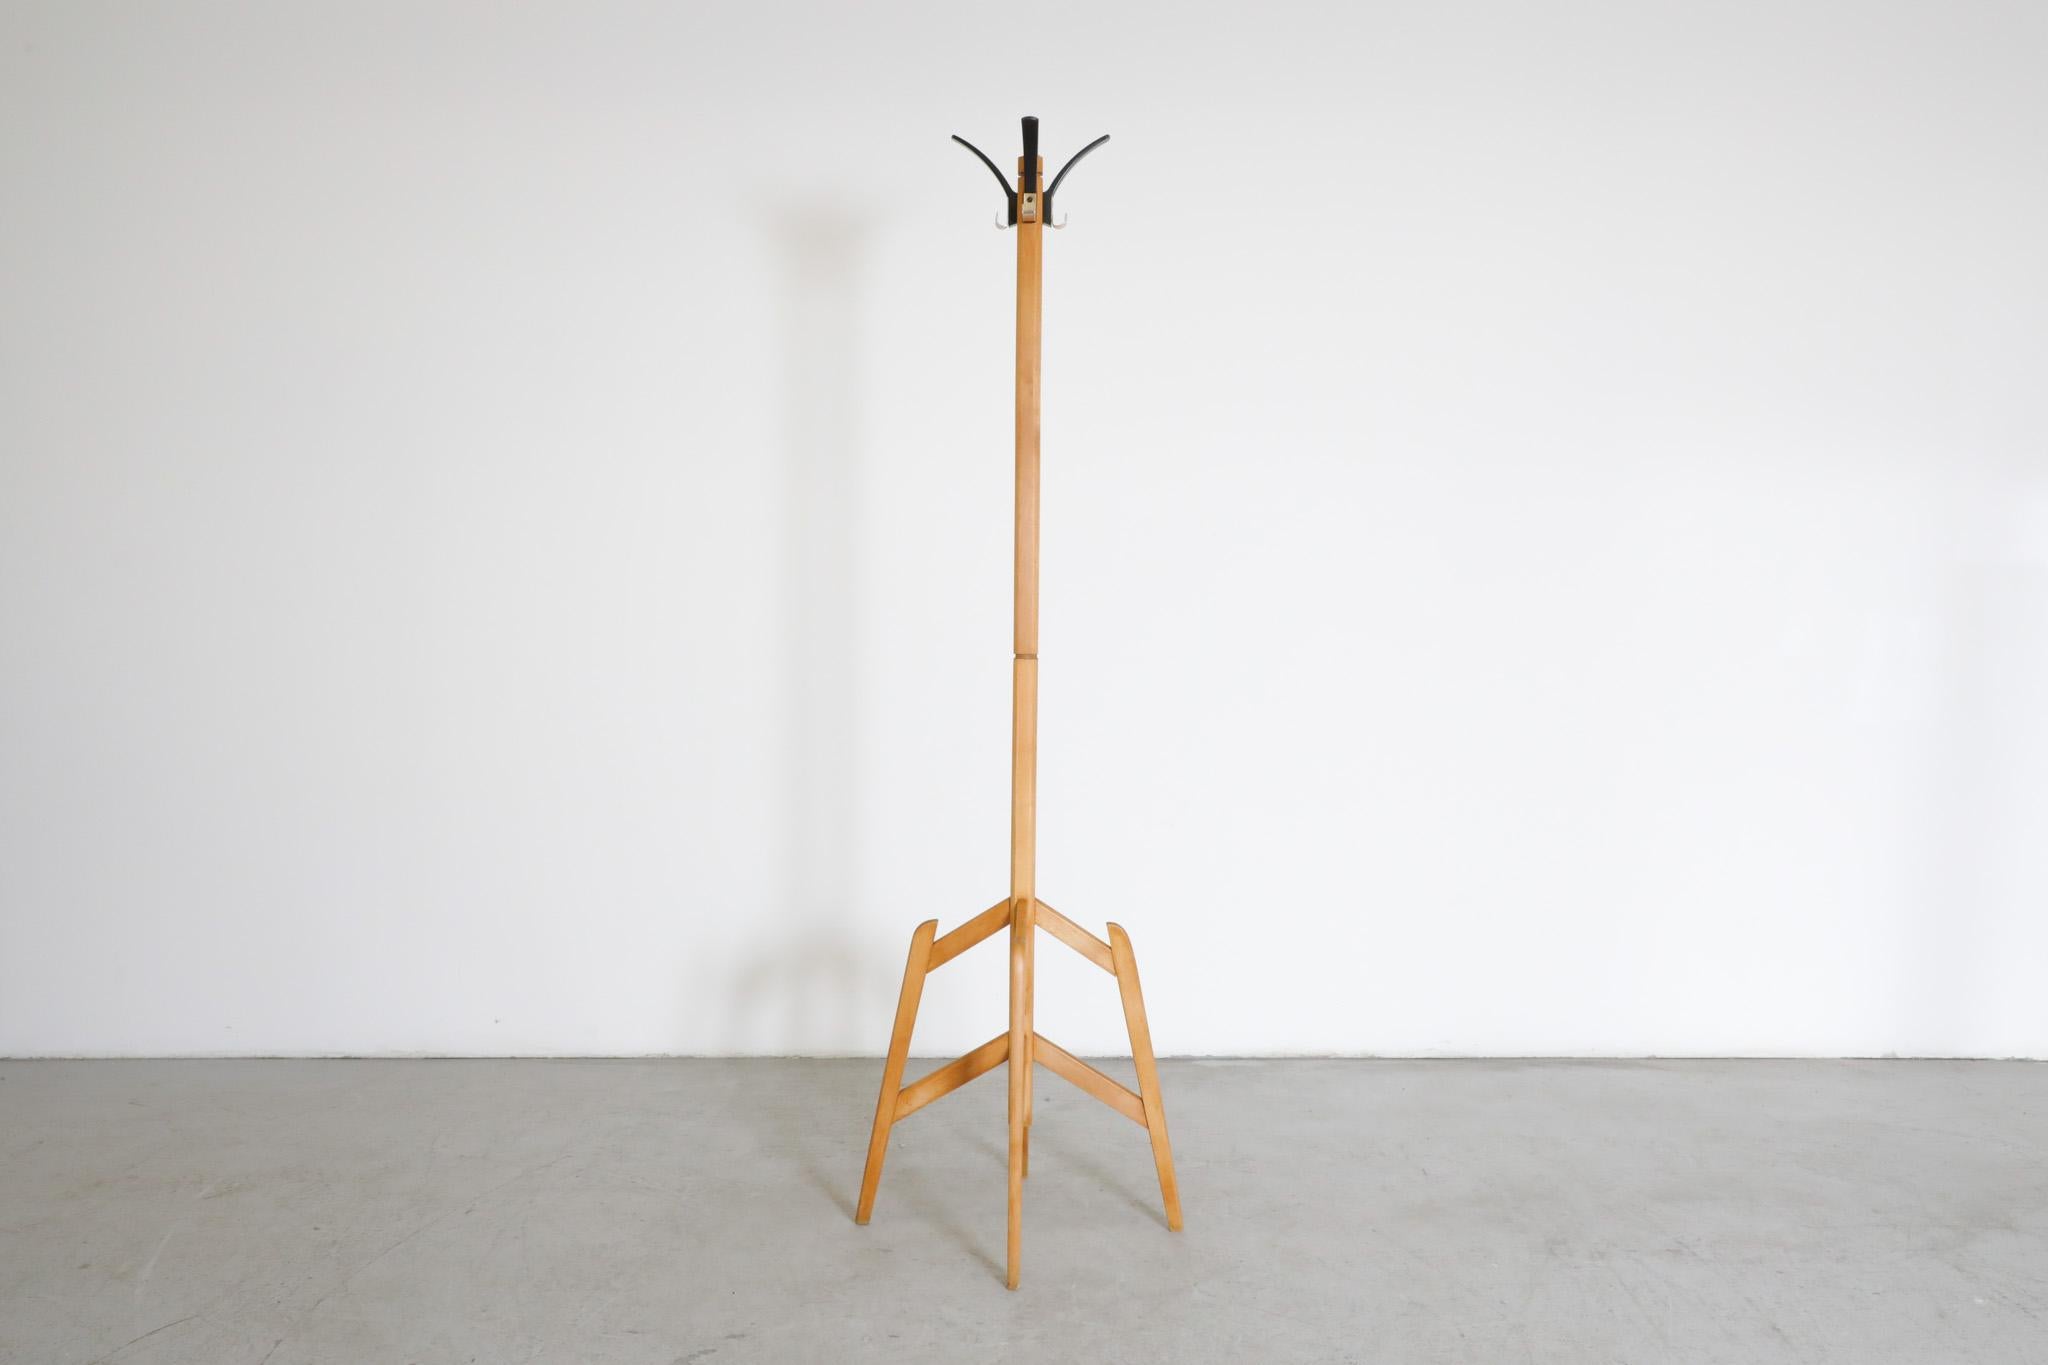 Gorgeoius, minimalistic, 1940's wooden standing coat tree with black coat hooks. Beautiful, simple Prouve inspired design, stripped to its essence without compromising its esthetics nor function. In original condition with visible wear consistent